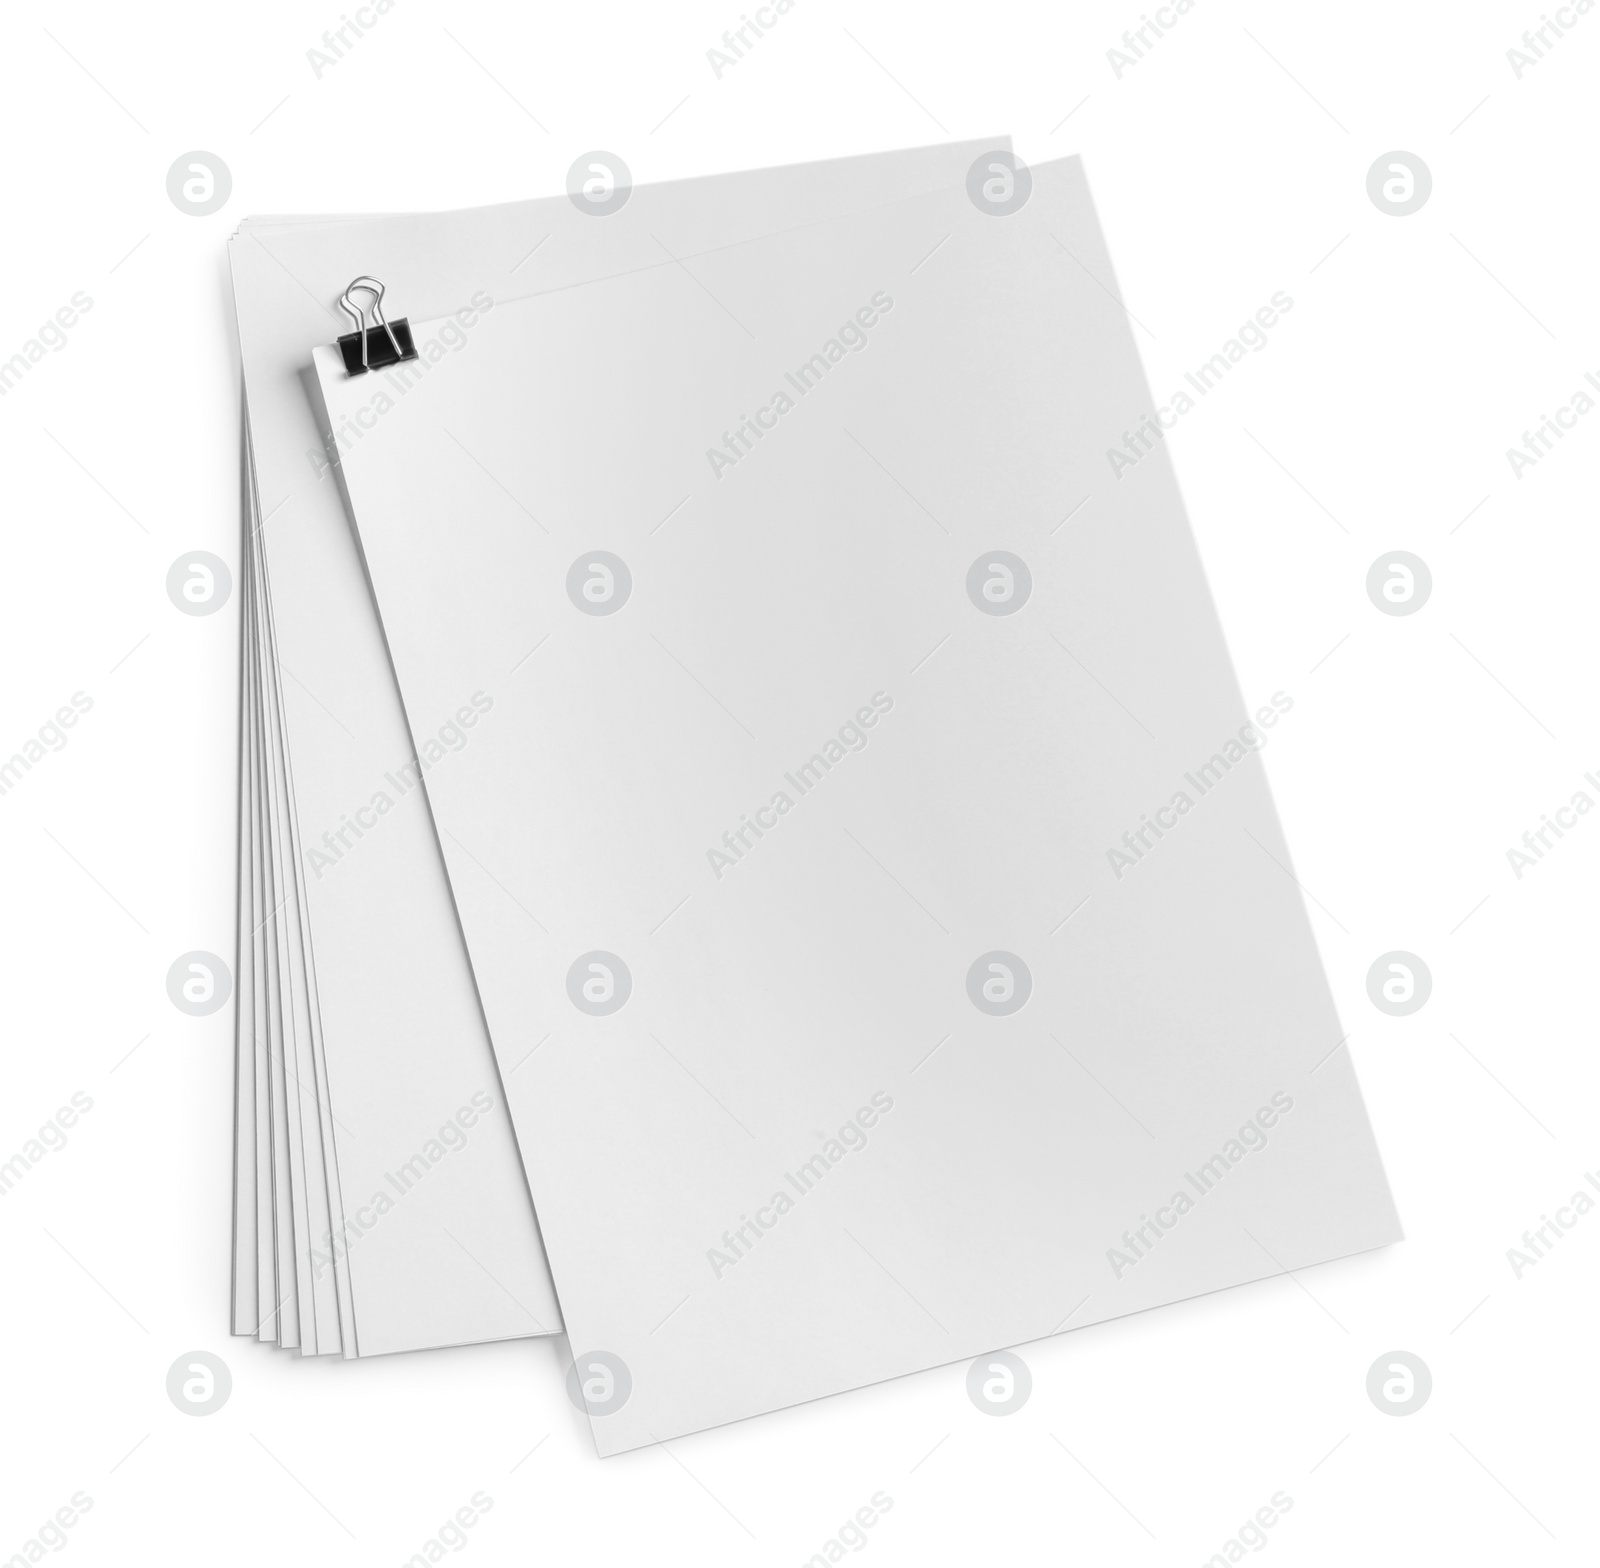 Photo of Blank sheets of paper with binder clip on white background, top view